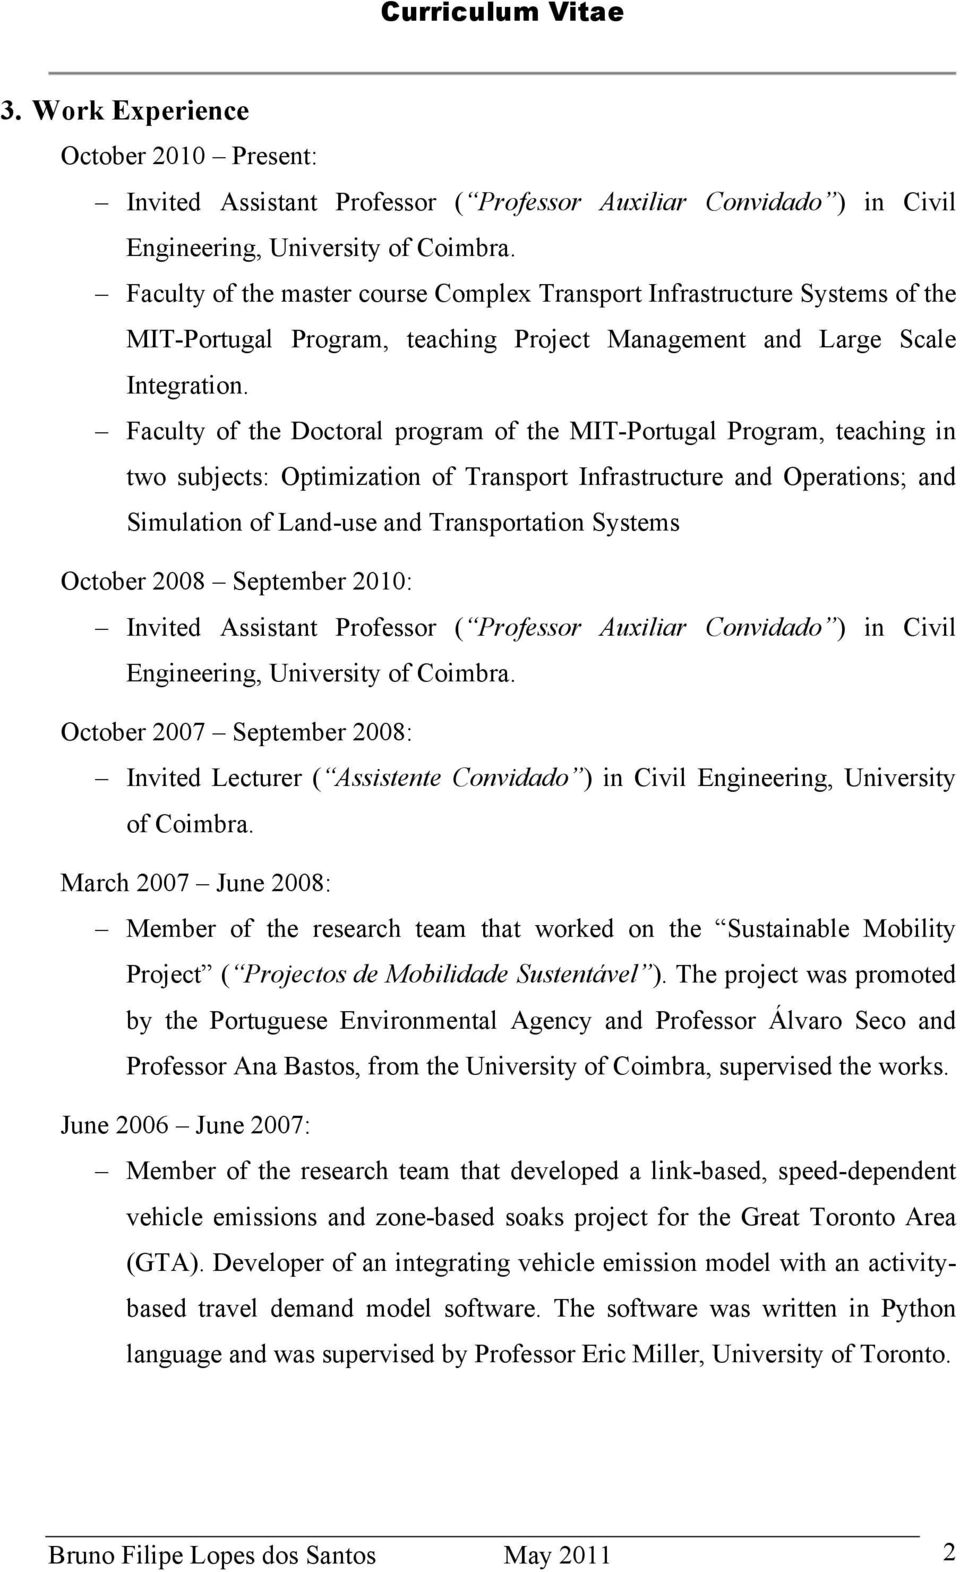 Faculty of the Doctoral program of the MIT-Portugal Program, teaching in two subjects: Optimization of Transport Infrastructure and Operations; and Simulation of Land-use and Transportation Systems